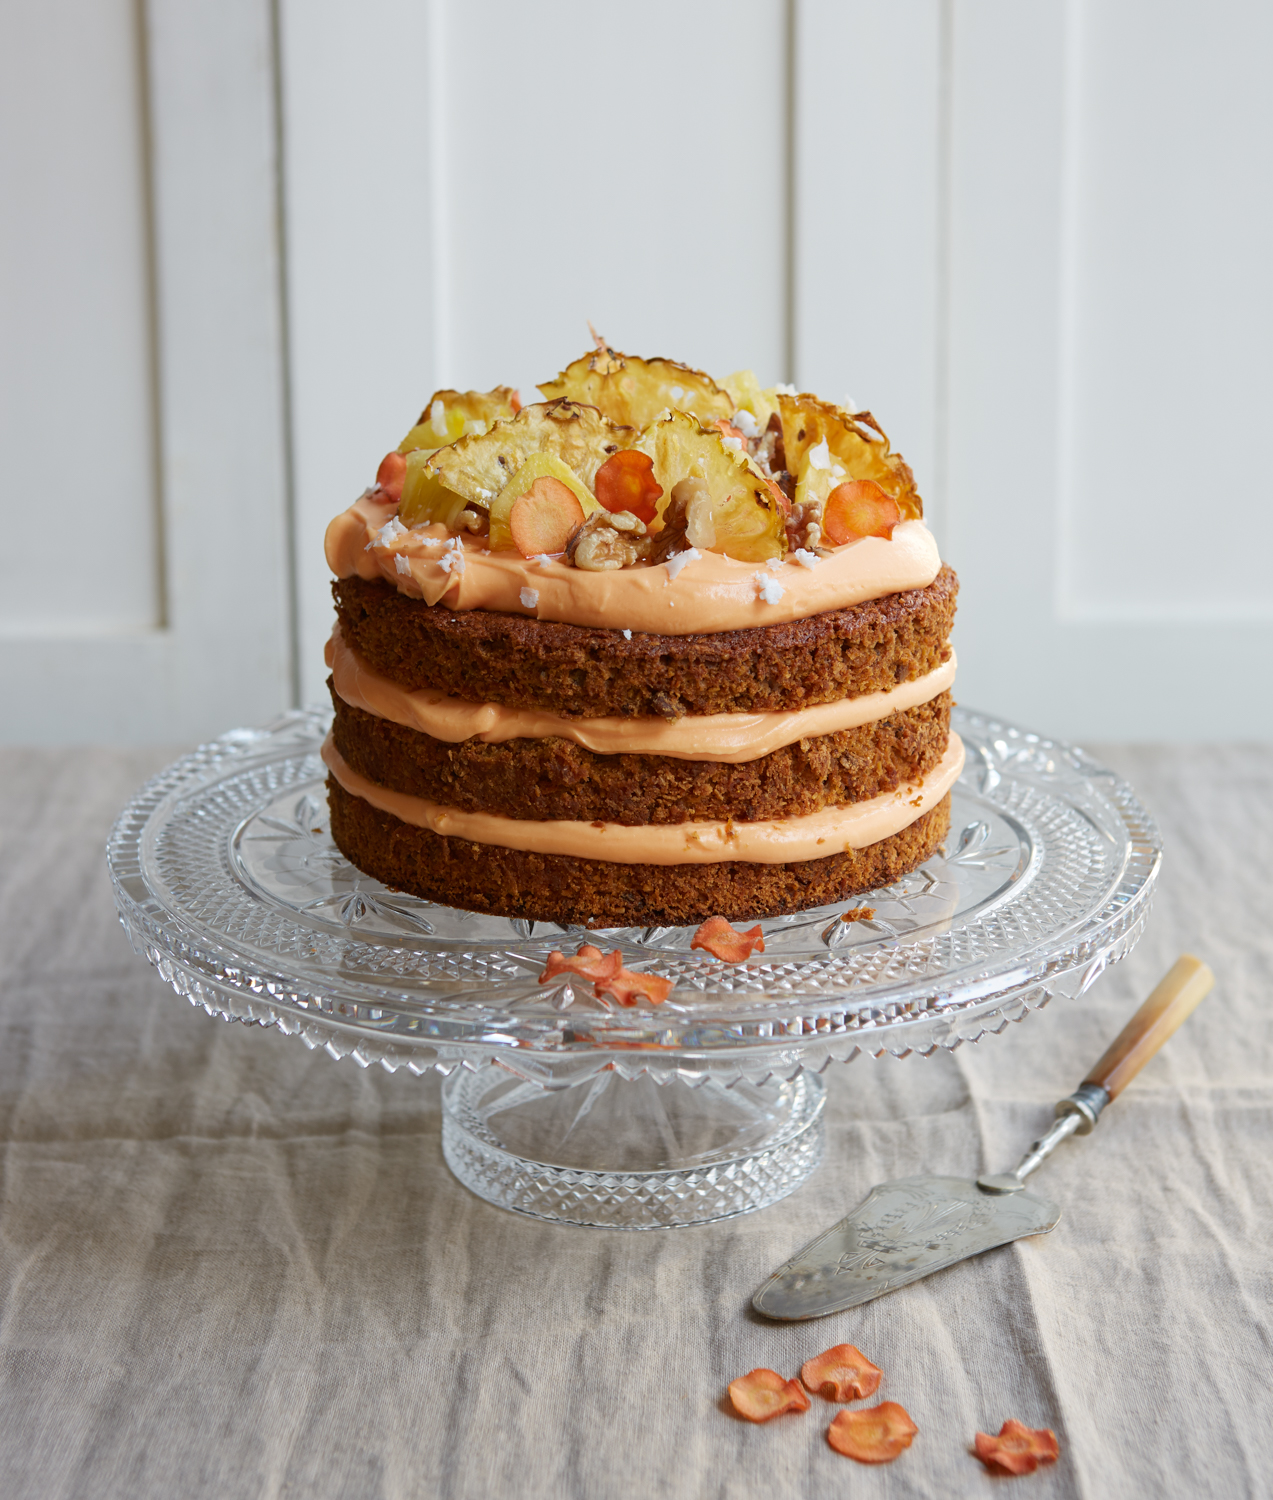 Carrot and Pineapple Cake by Beate Wöllstein